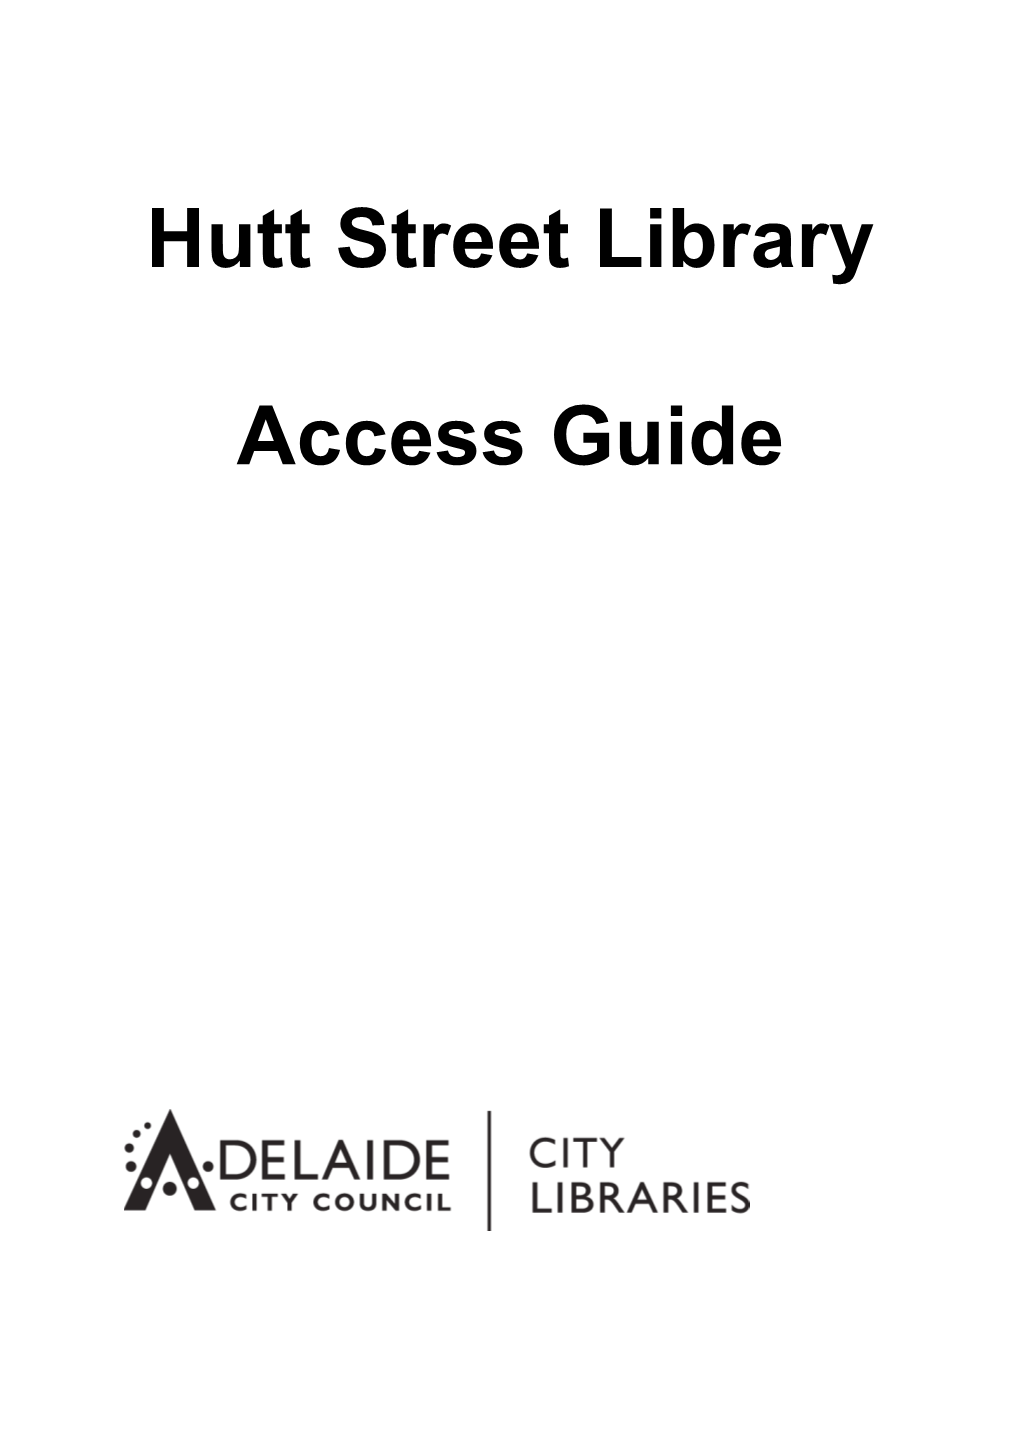 1.Using the Hutt Street Library Access Guide